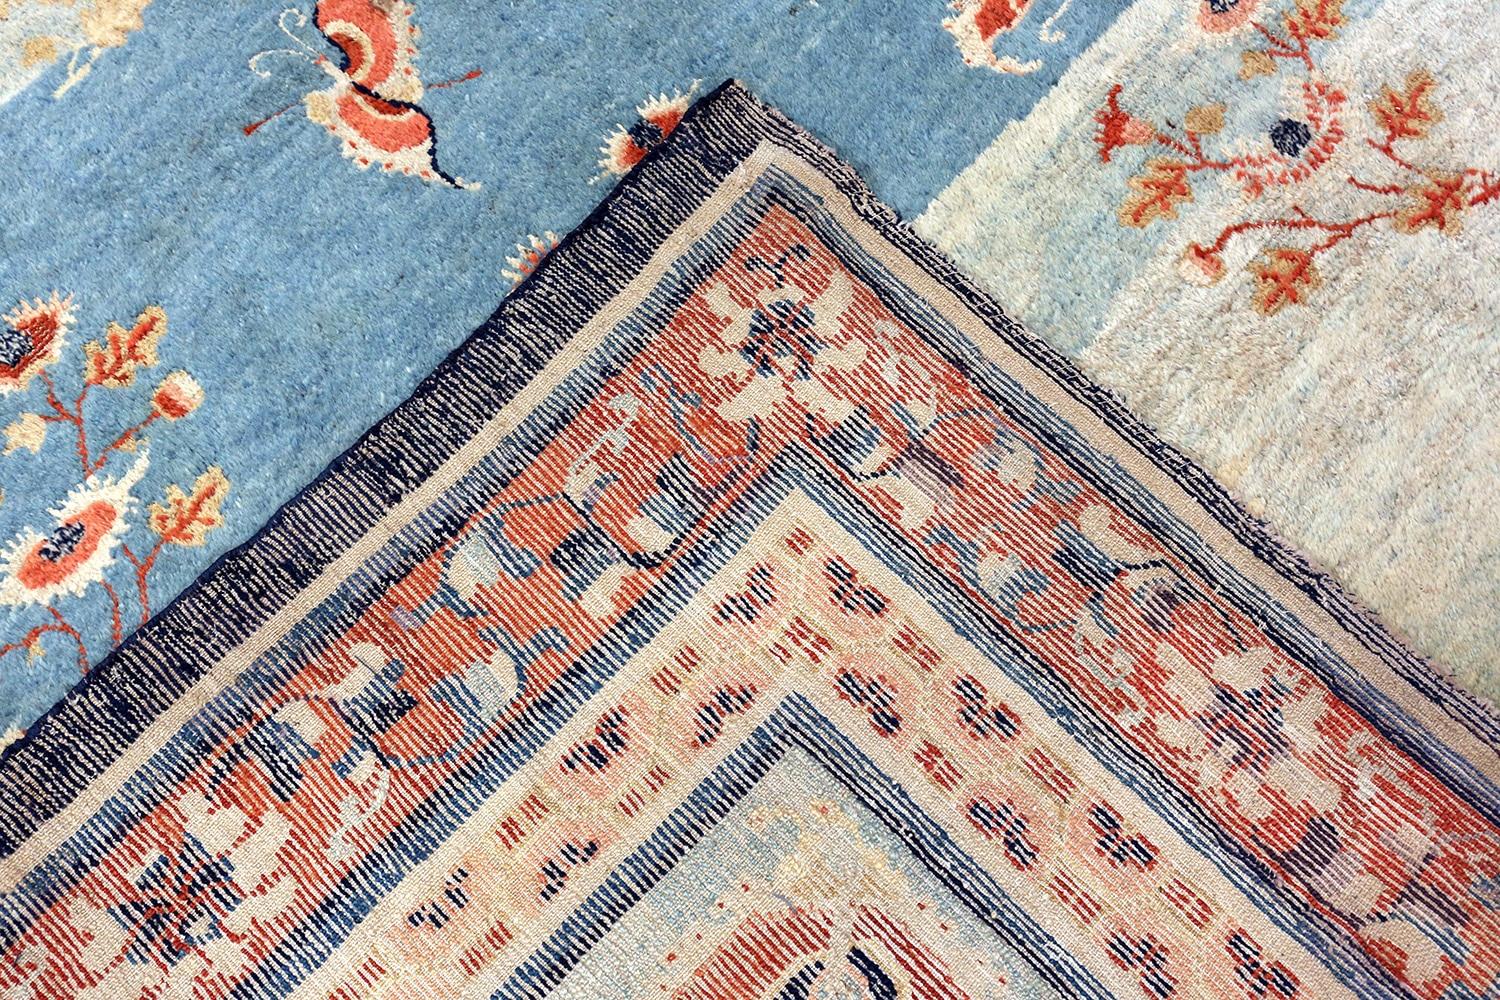 Beautiful light blue background color rare 18th century Kansu carpet, Country of origin / Rug Type: Antique Chinese Rugs, Circa date: 18th Century. Size: 9 ft 4 in x 14 ft 2 in (2.84 m x 4.32 m)

